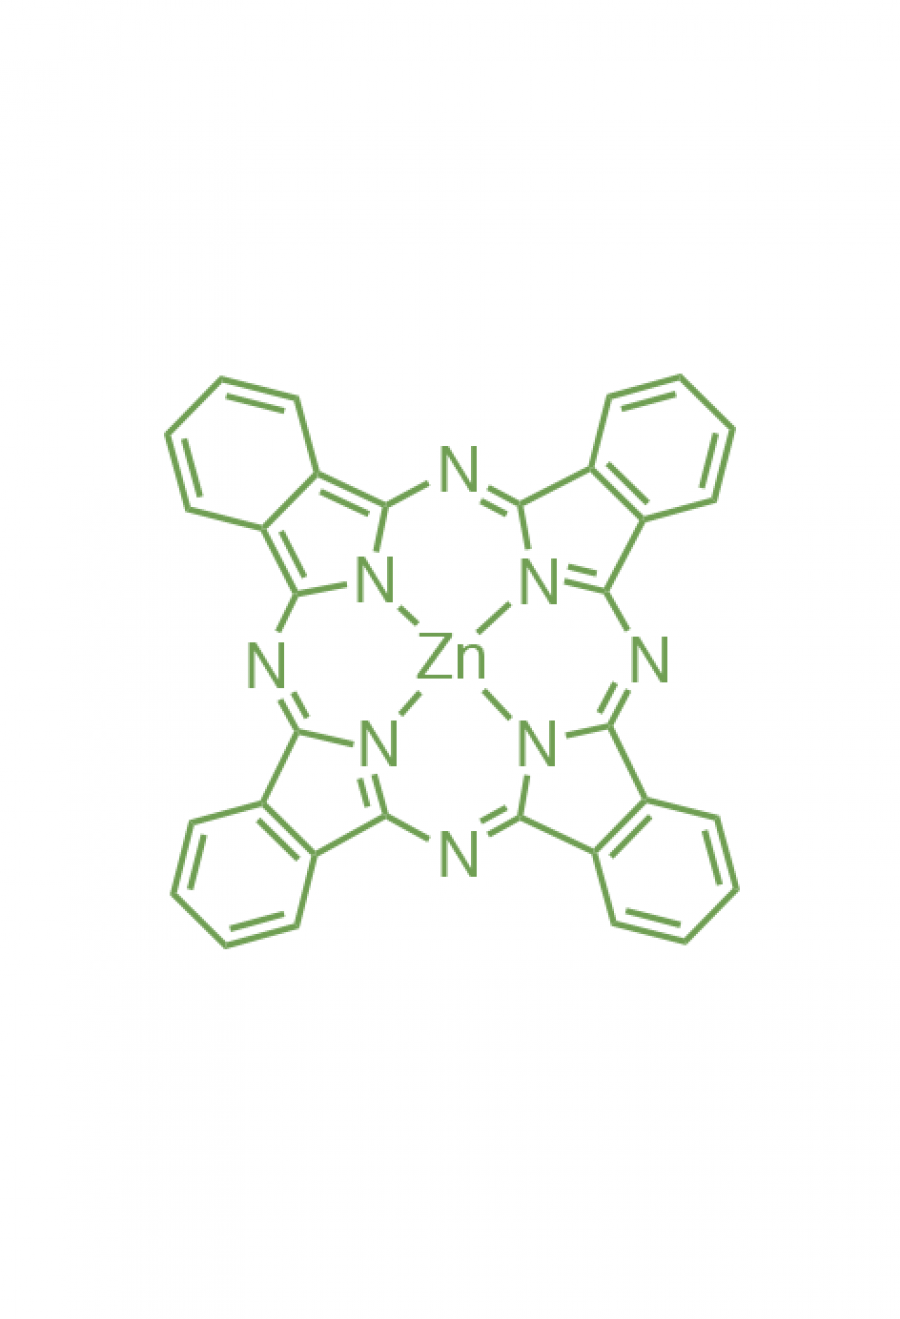 zinc(II) phthalocyanine  | Porphychem Expert porphyrin synthesis for research & industry